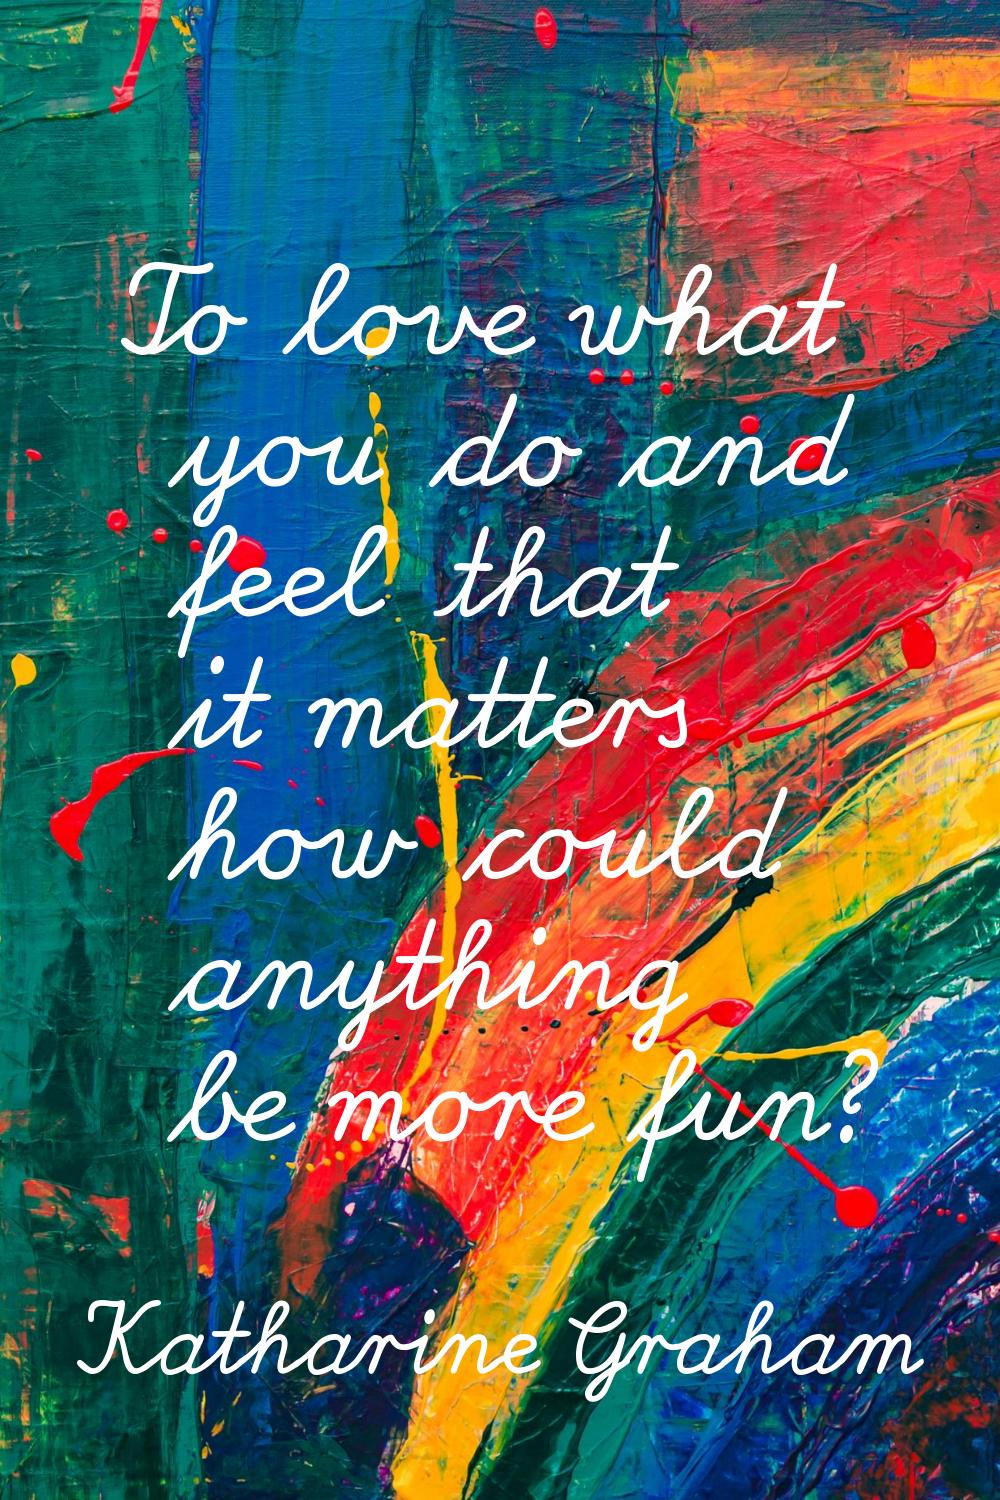 To love what you do and feel that it matters how could anything be more fun?